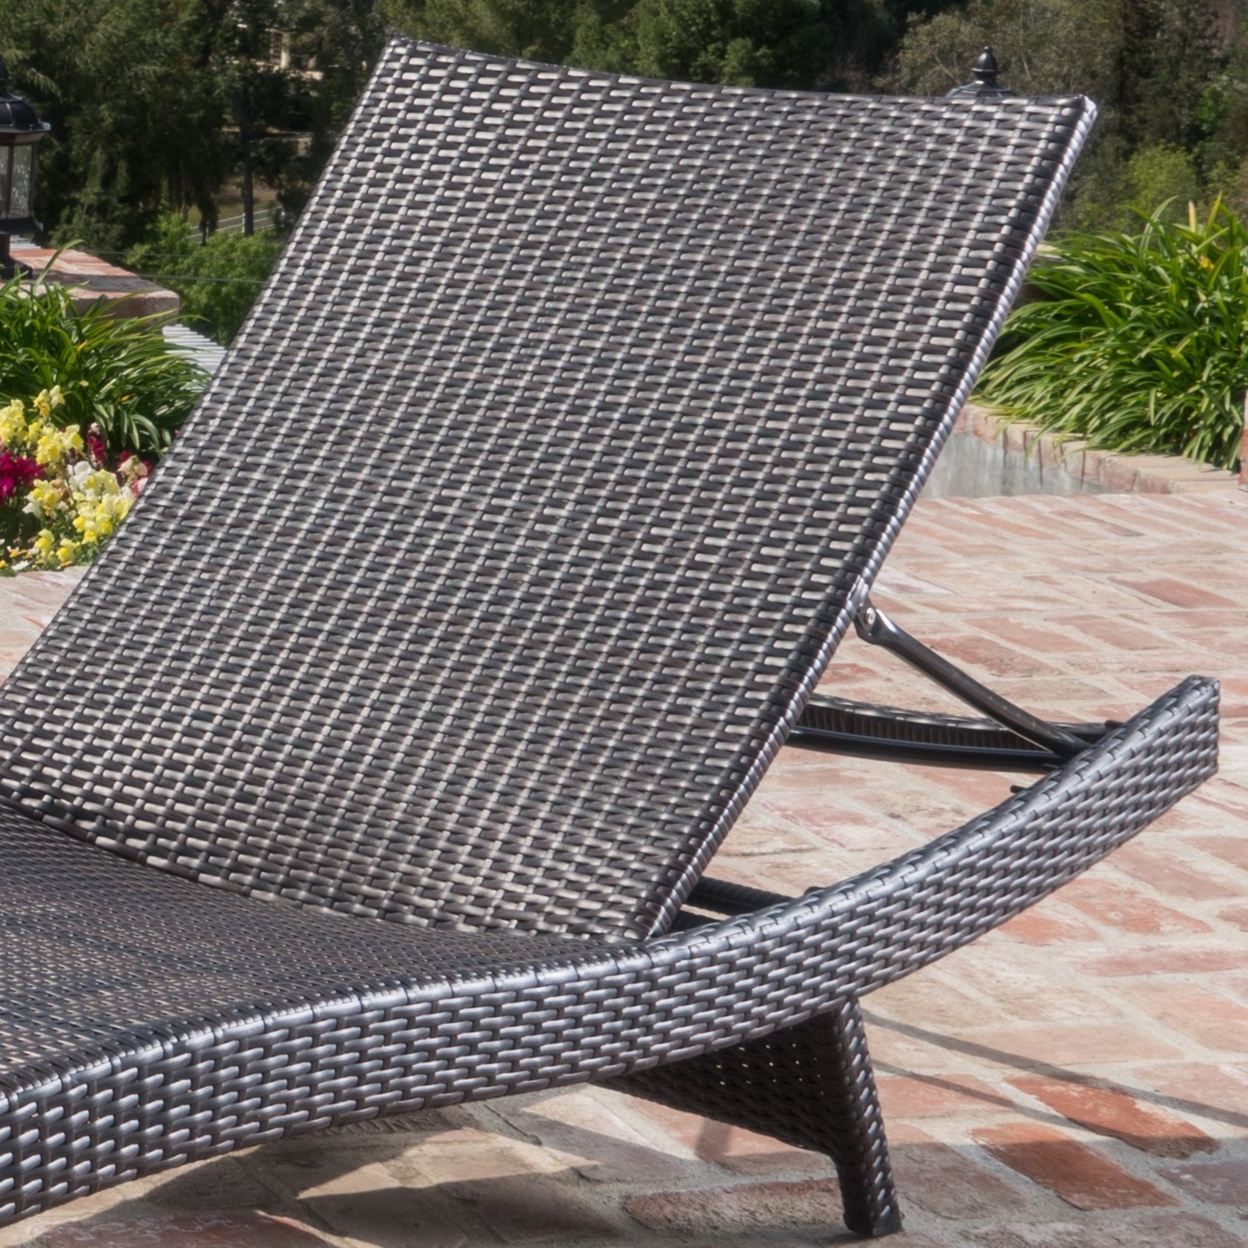 Lakeport Outdoor Wicker Lounge WithBrown & White Stripe Water Resistant Cusions